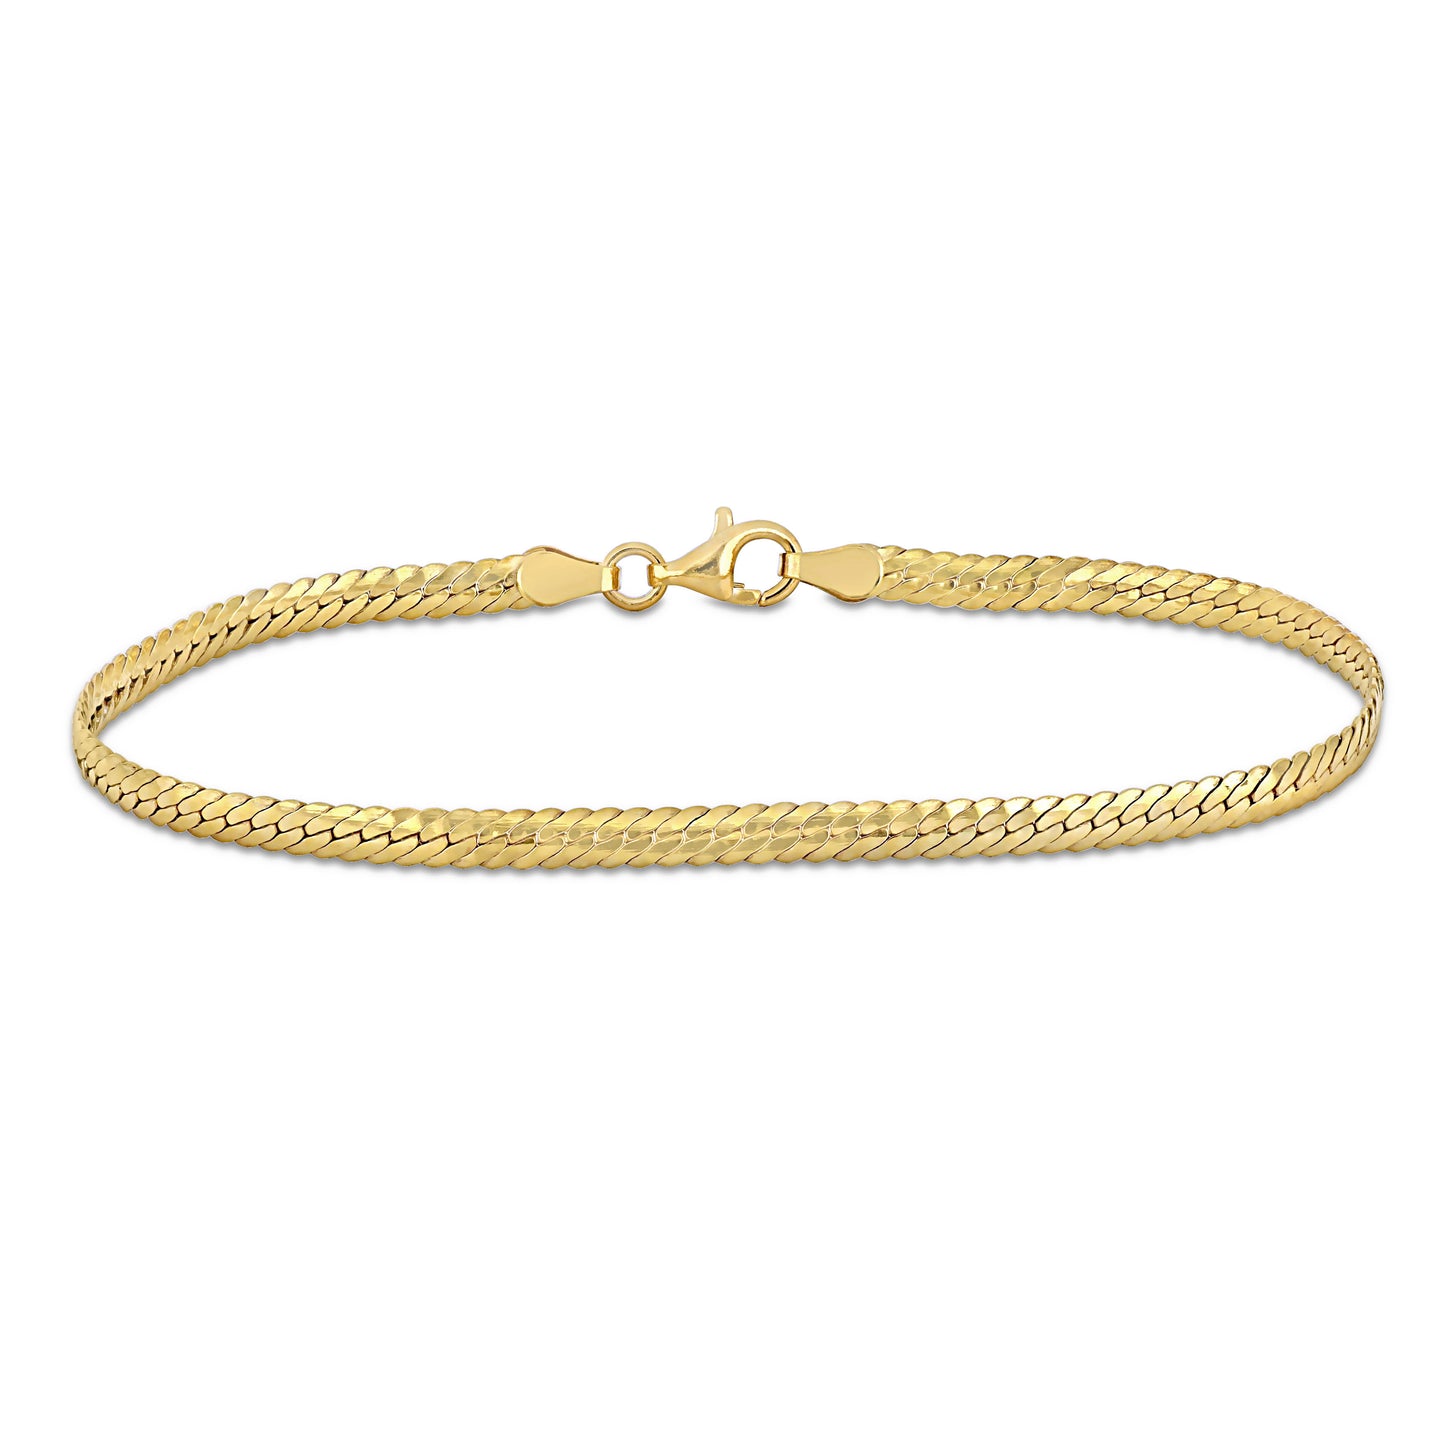 SILVER 18K Yellow Gold Plated 3MM HERRINGBONE BRACELET W/ LOBSTER CLASP LENGTH (INCHES):9